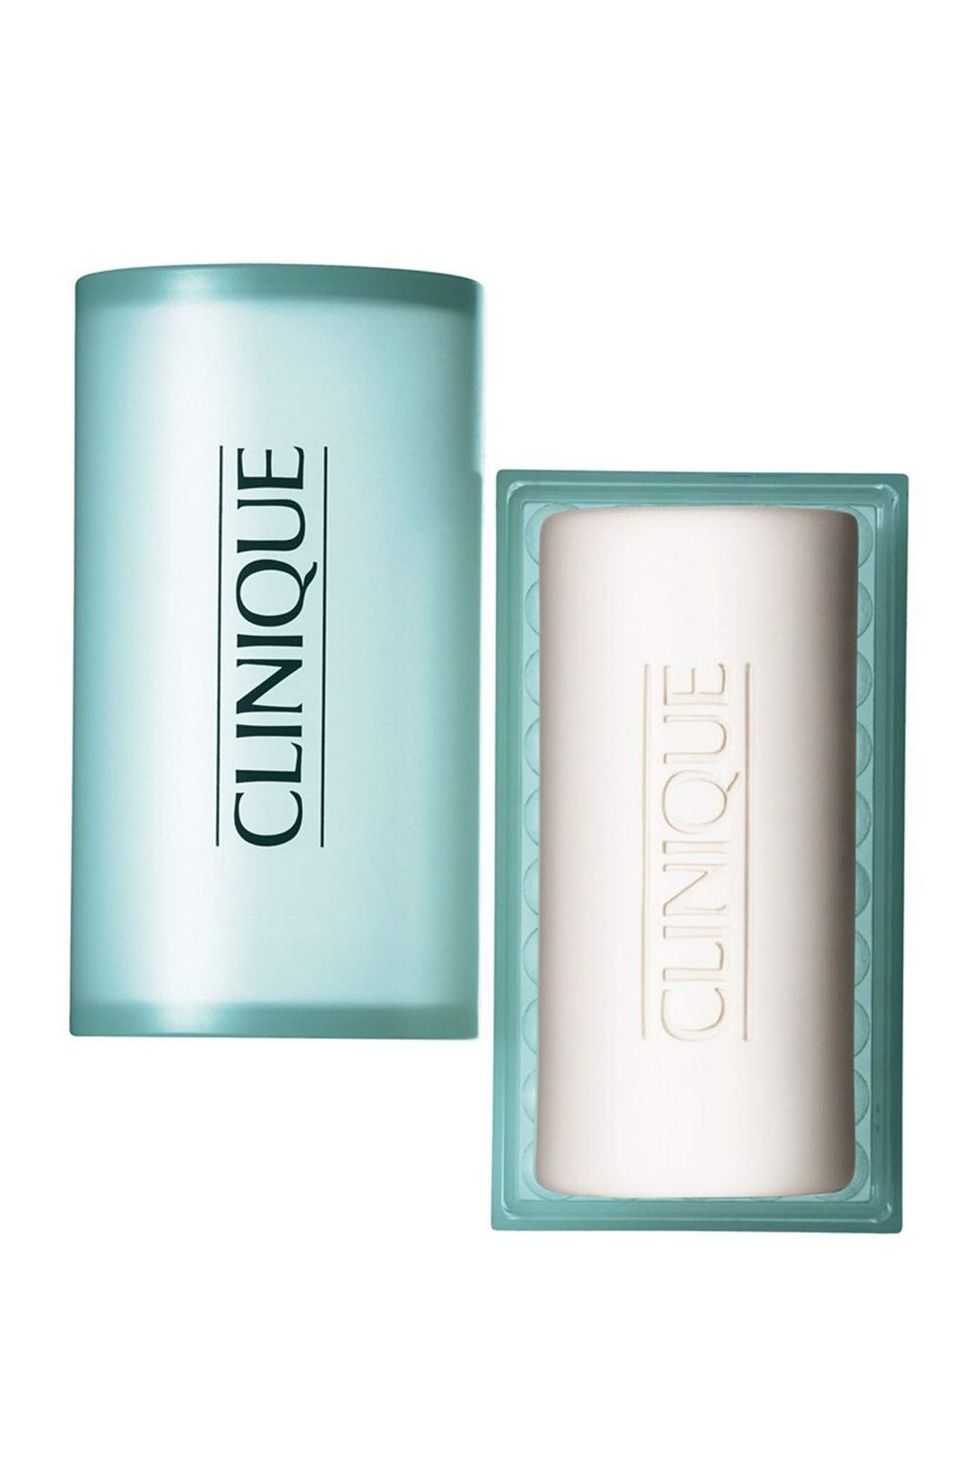 Clinique Acne Solutions Cleansing Bar for Face and Body